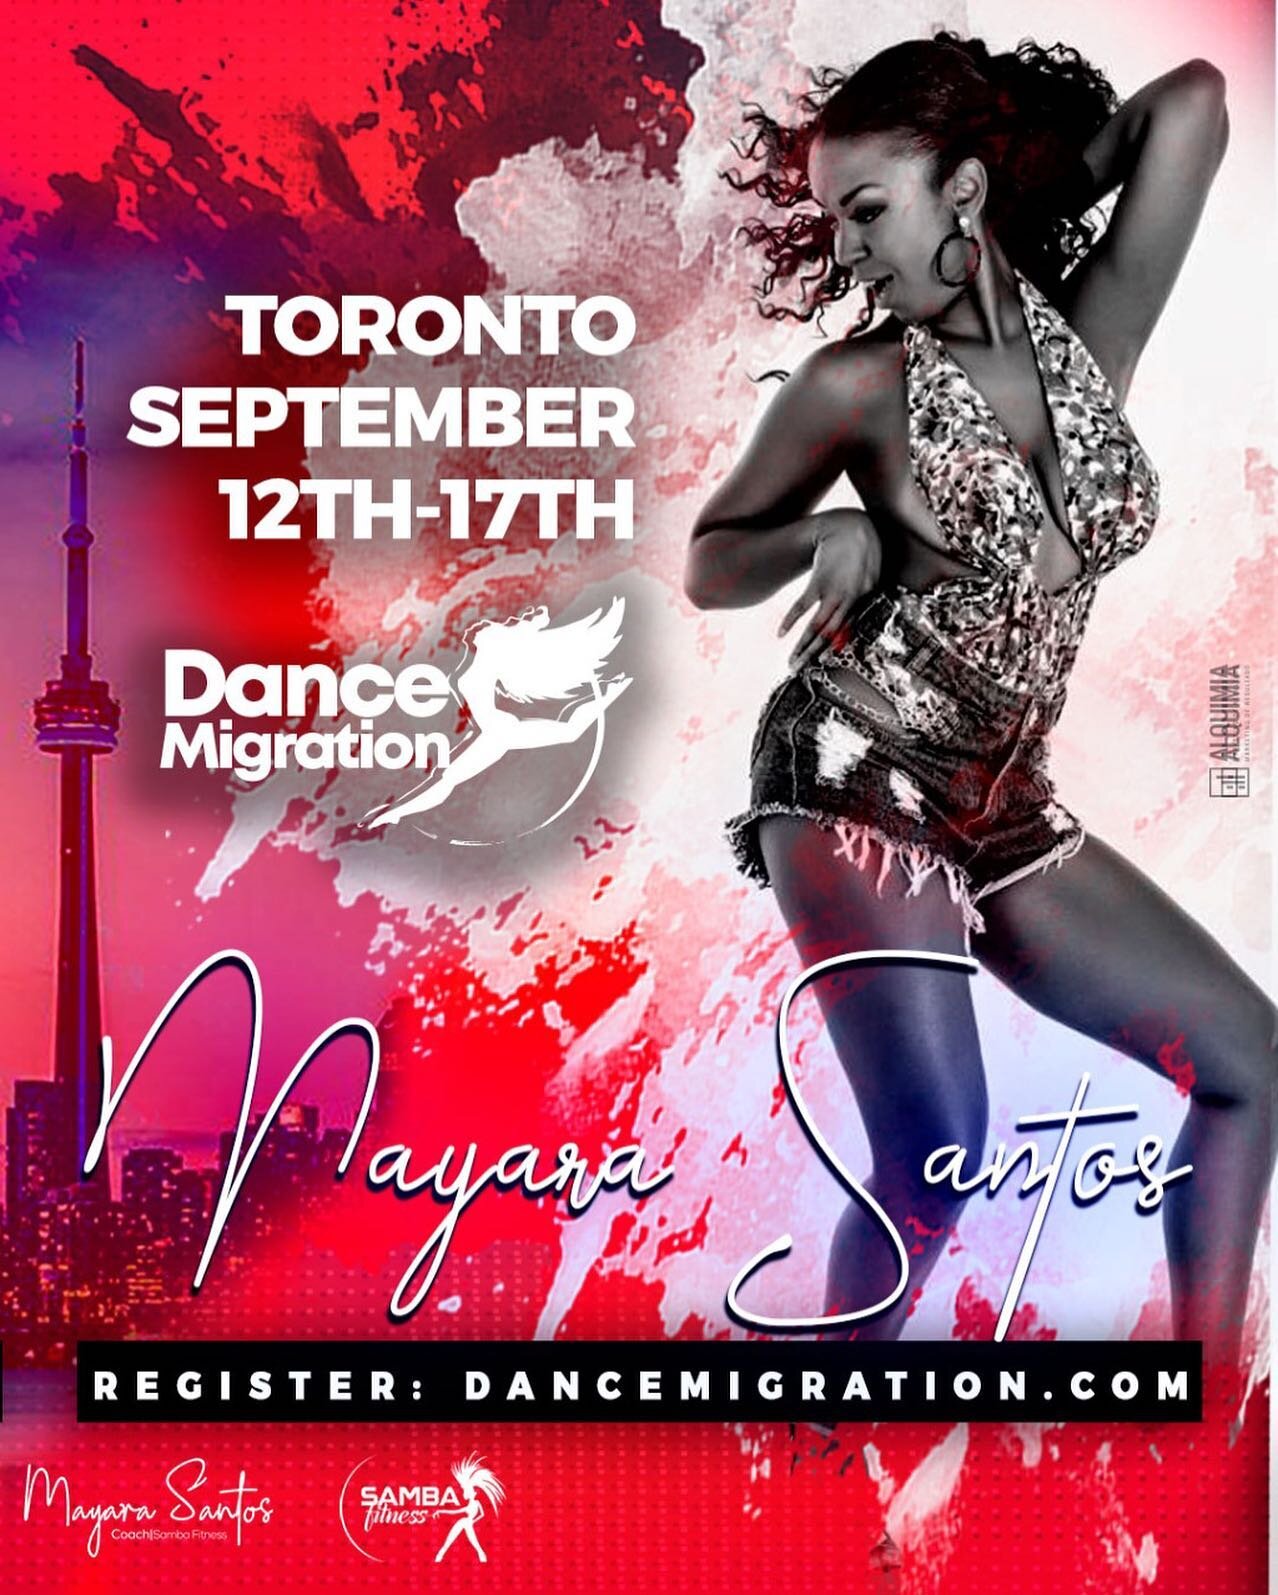 MAYARA SANTOS : Toronto Samba Workshop Series

Direct from Brazil 🇧🇷 Mayara will be here to share the best training in Samba no p&eacute;.

Monday- Wednesday September 12-14th open workshop class
7:00-9:00pm (6 hours total) 
📍553 Queen st. West

P